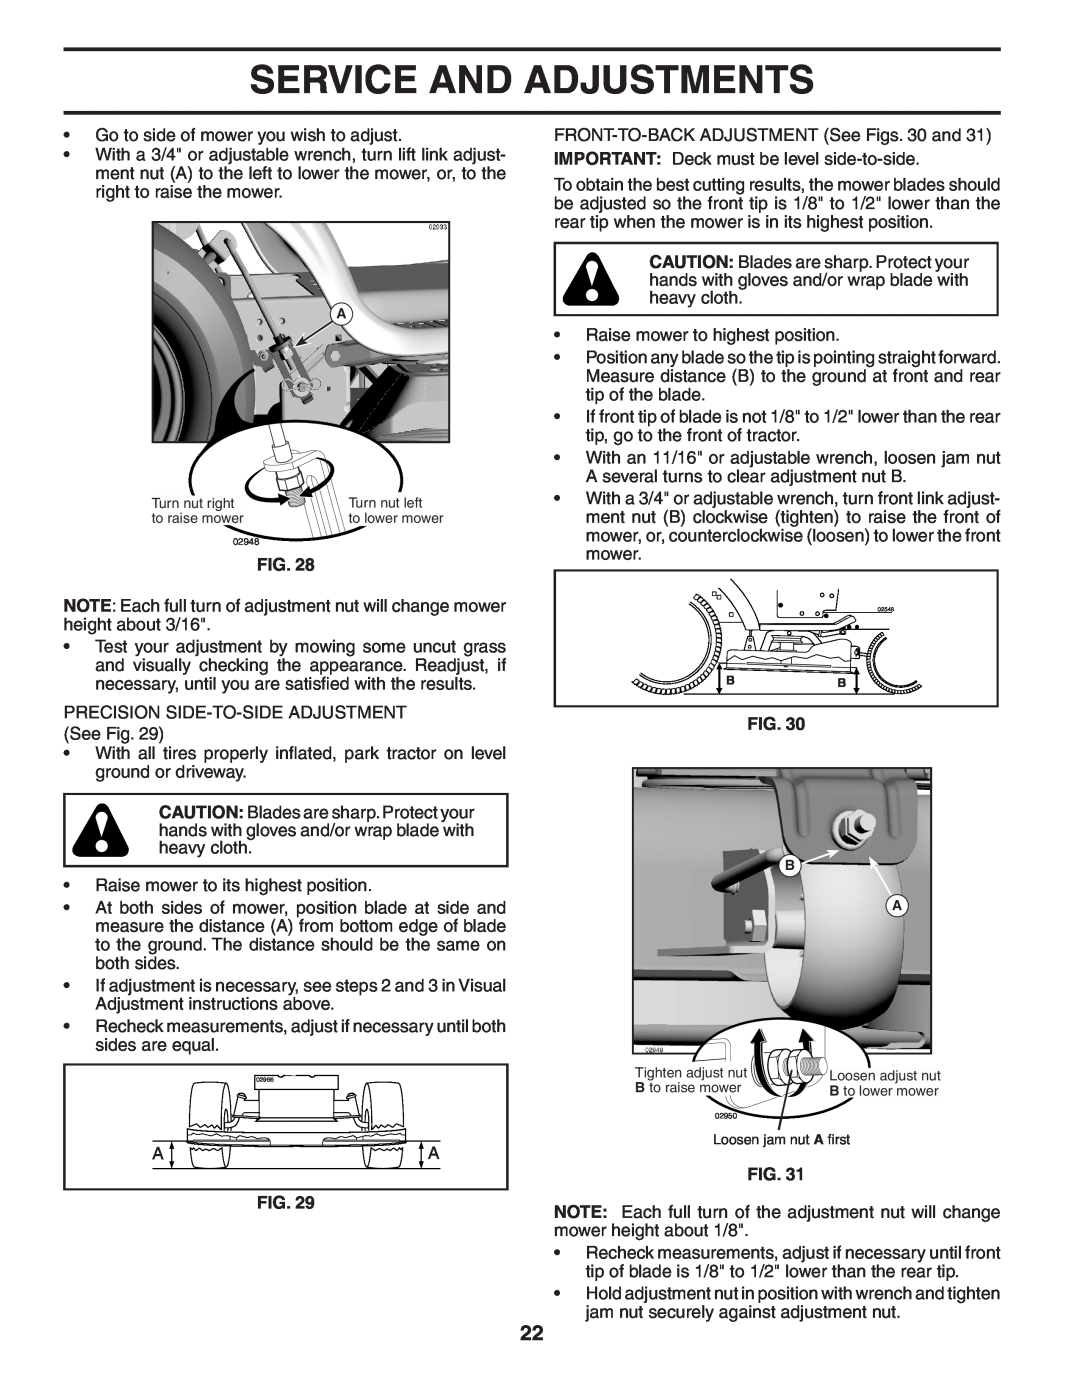 Poulan 405035 manual Service And Adjustments, Turn nut right, Turn nut left, Tighten adjust nut, B to raise mower 